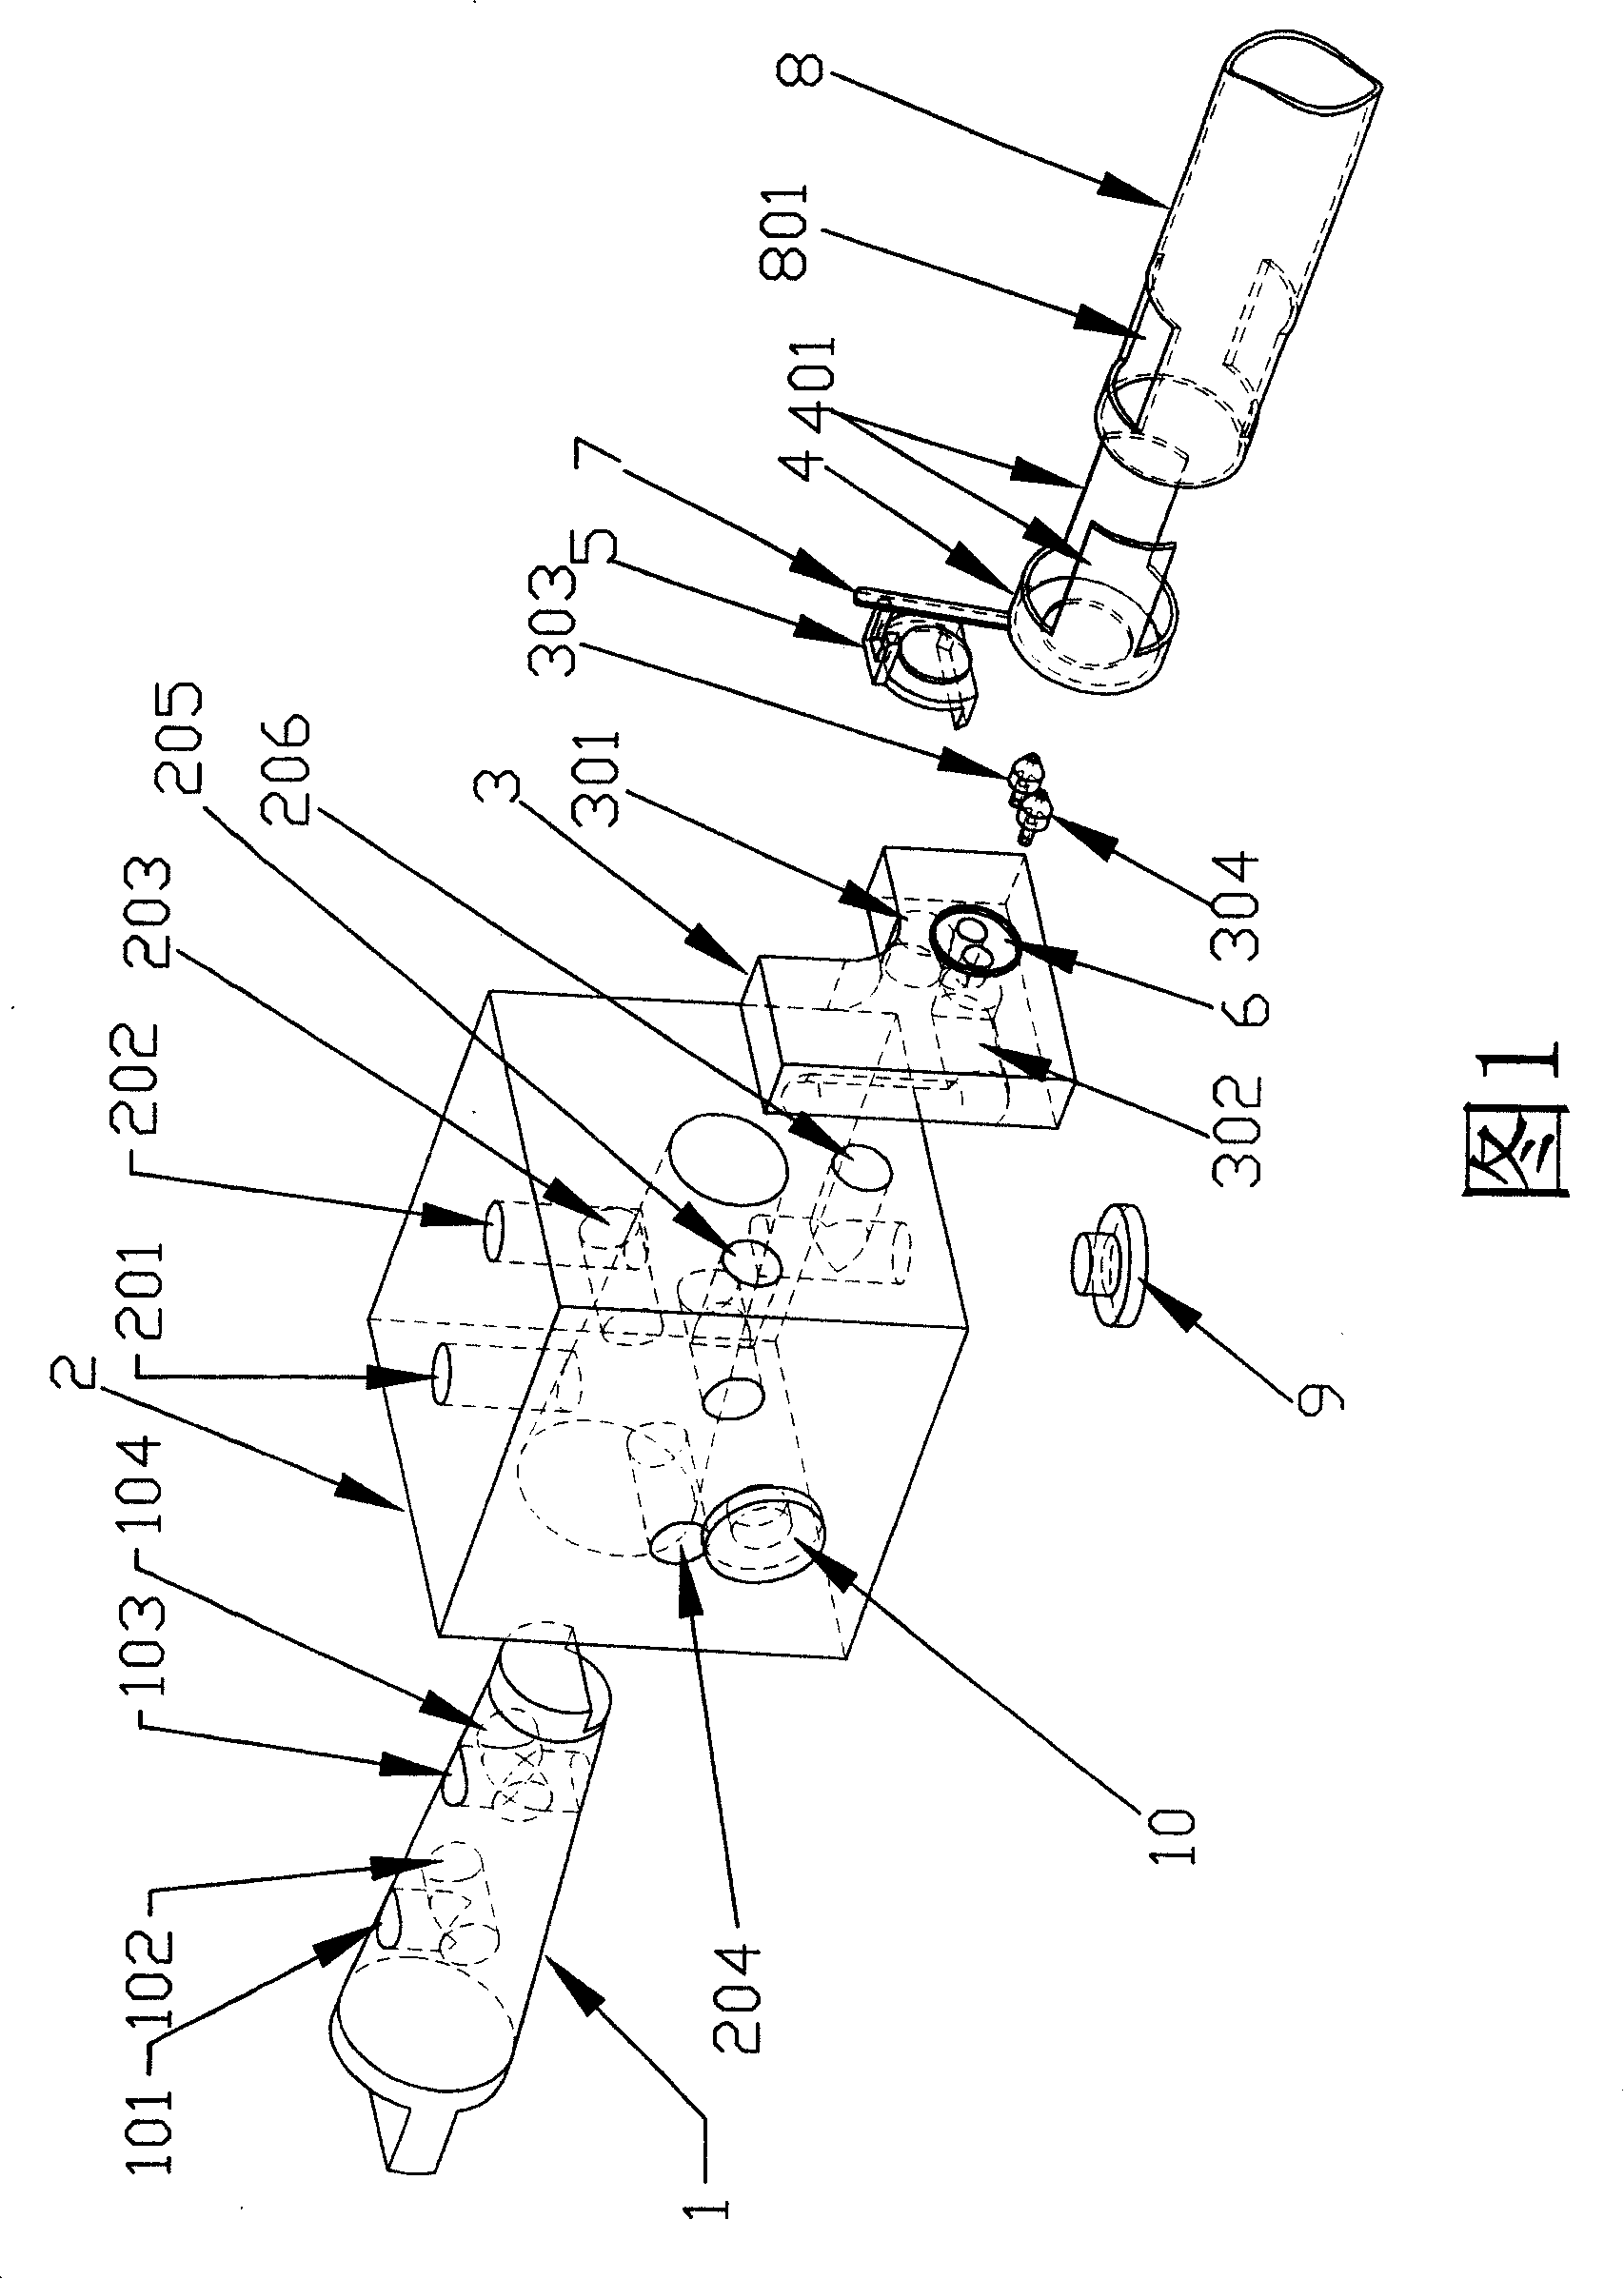 Valve for switching double gas supplies in use for fuel gas heating apparatus